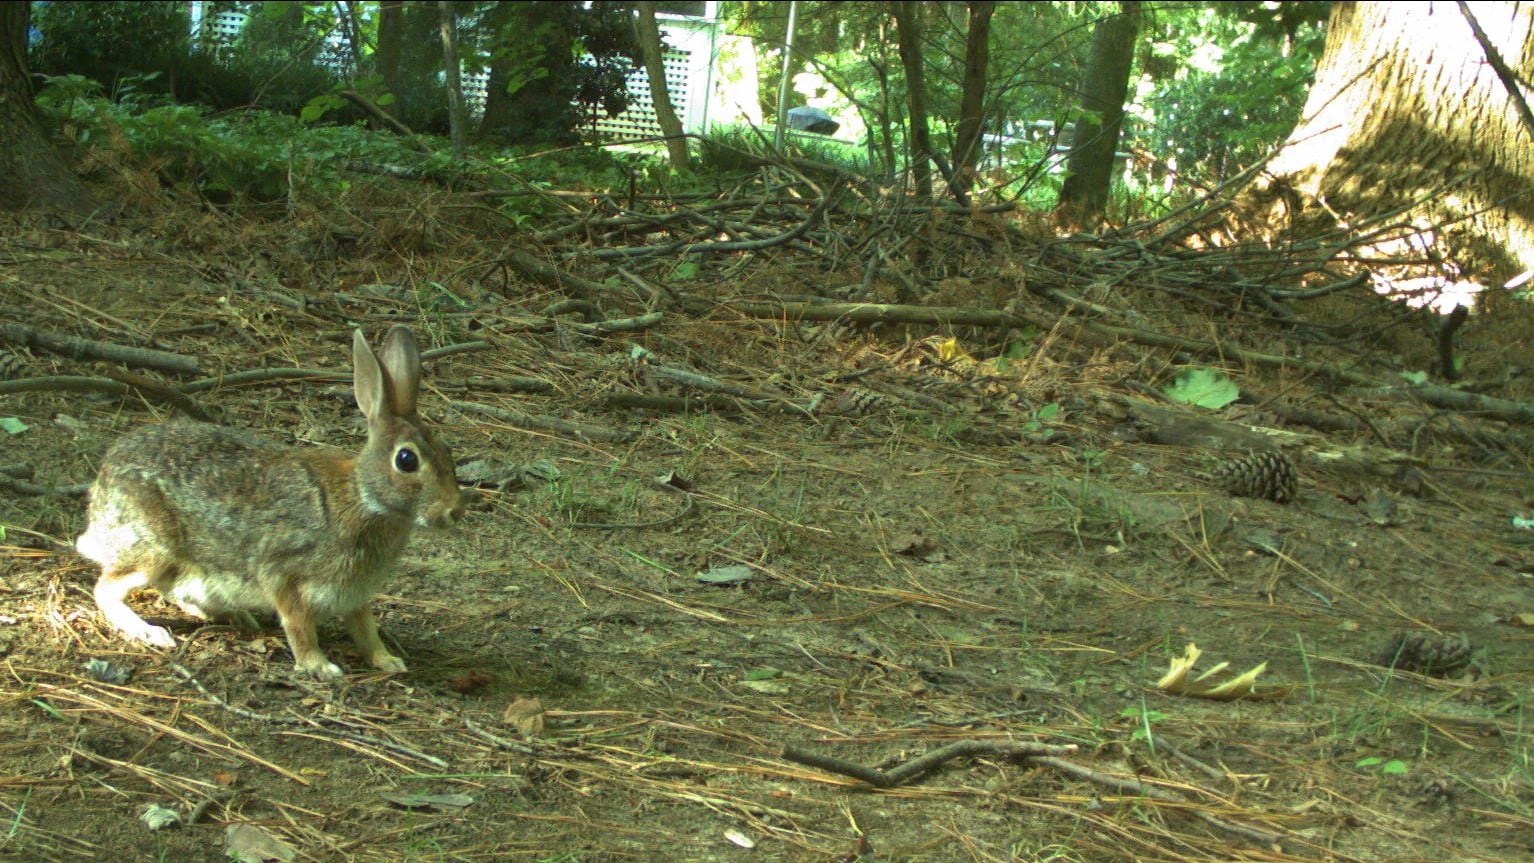 Eastern cottontail - During 'Anthropause,' Animals Moved More Freely - College of Natural Resources NC State University